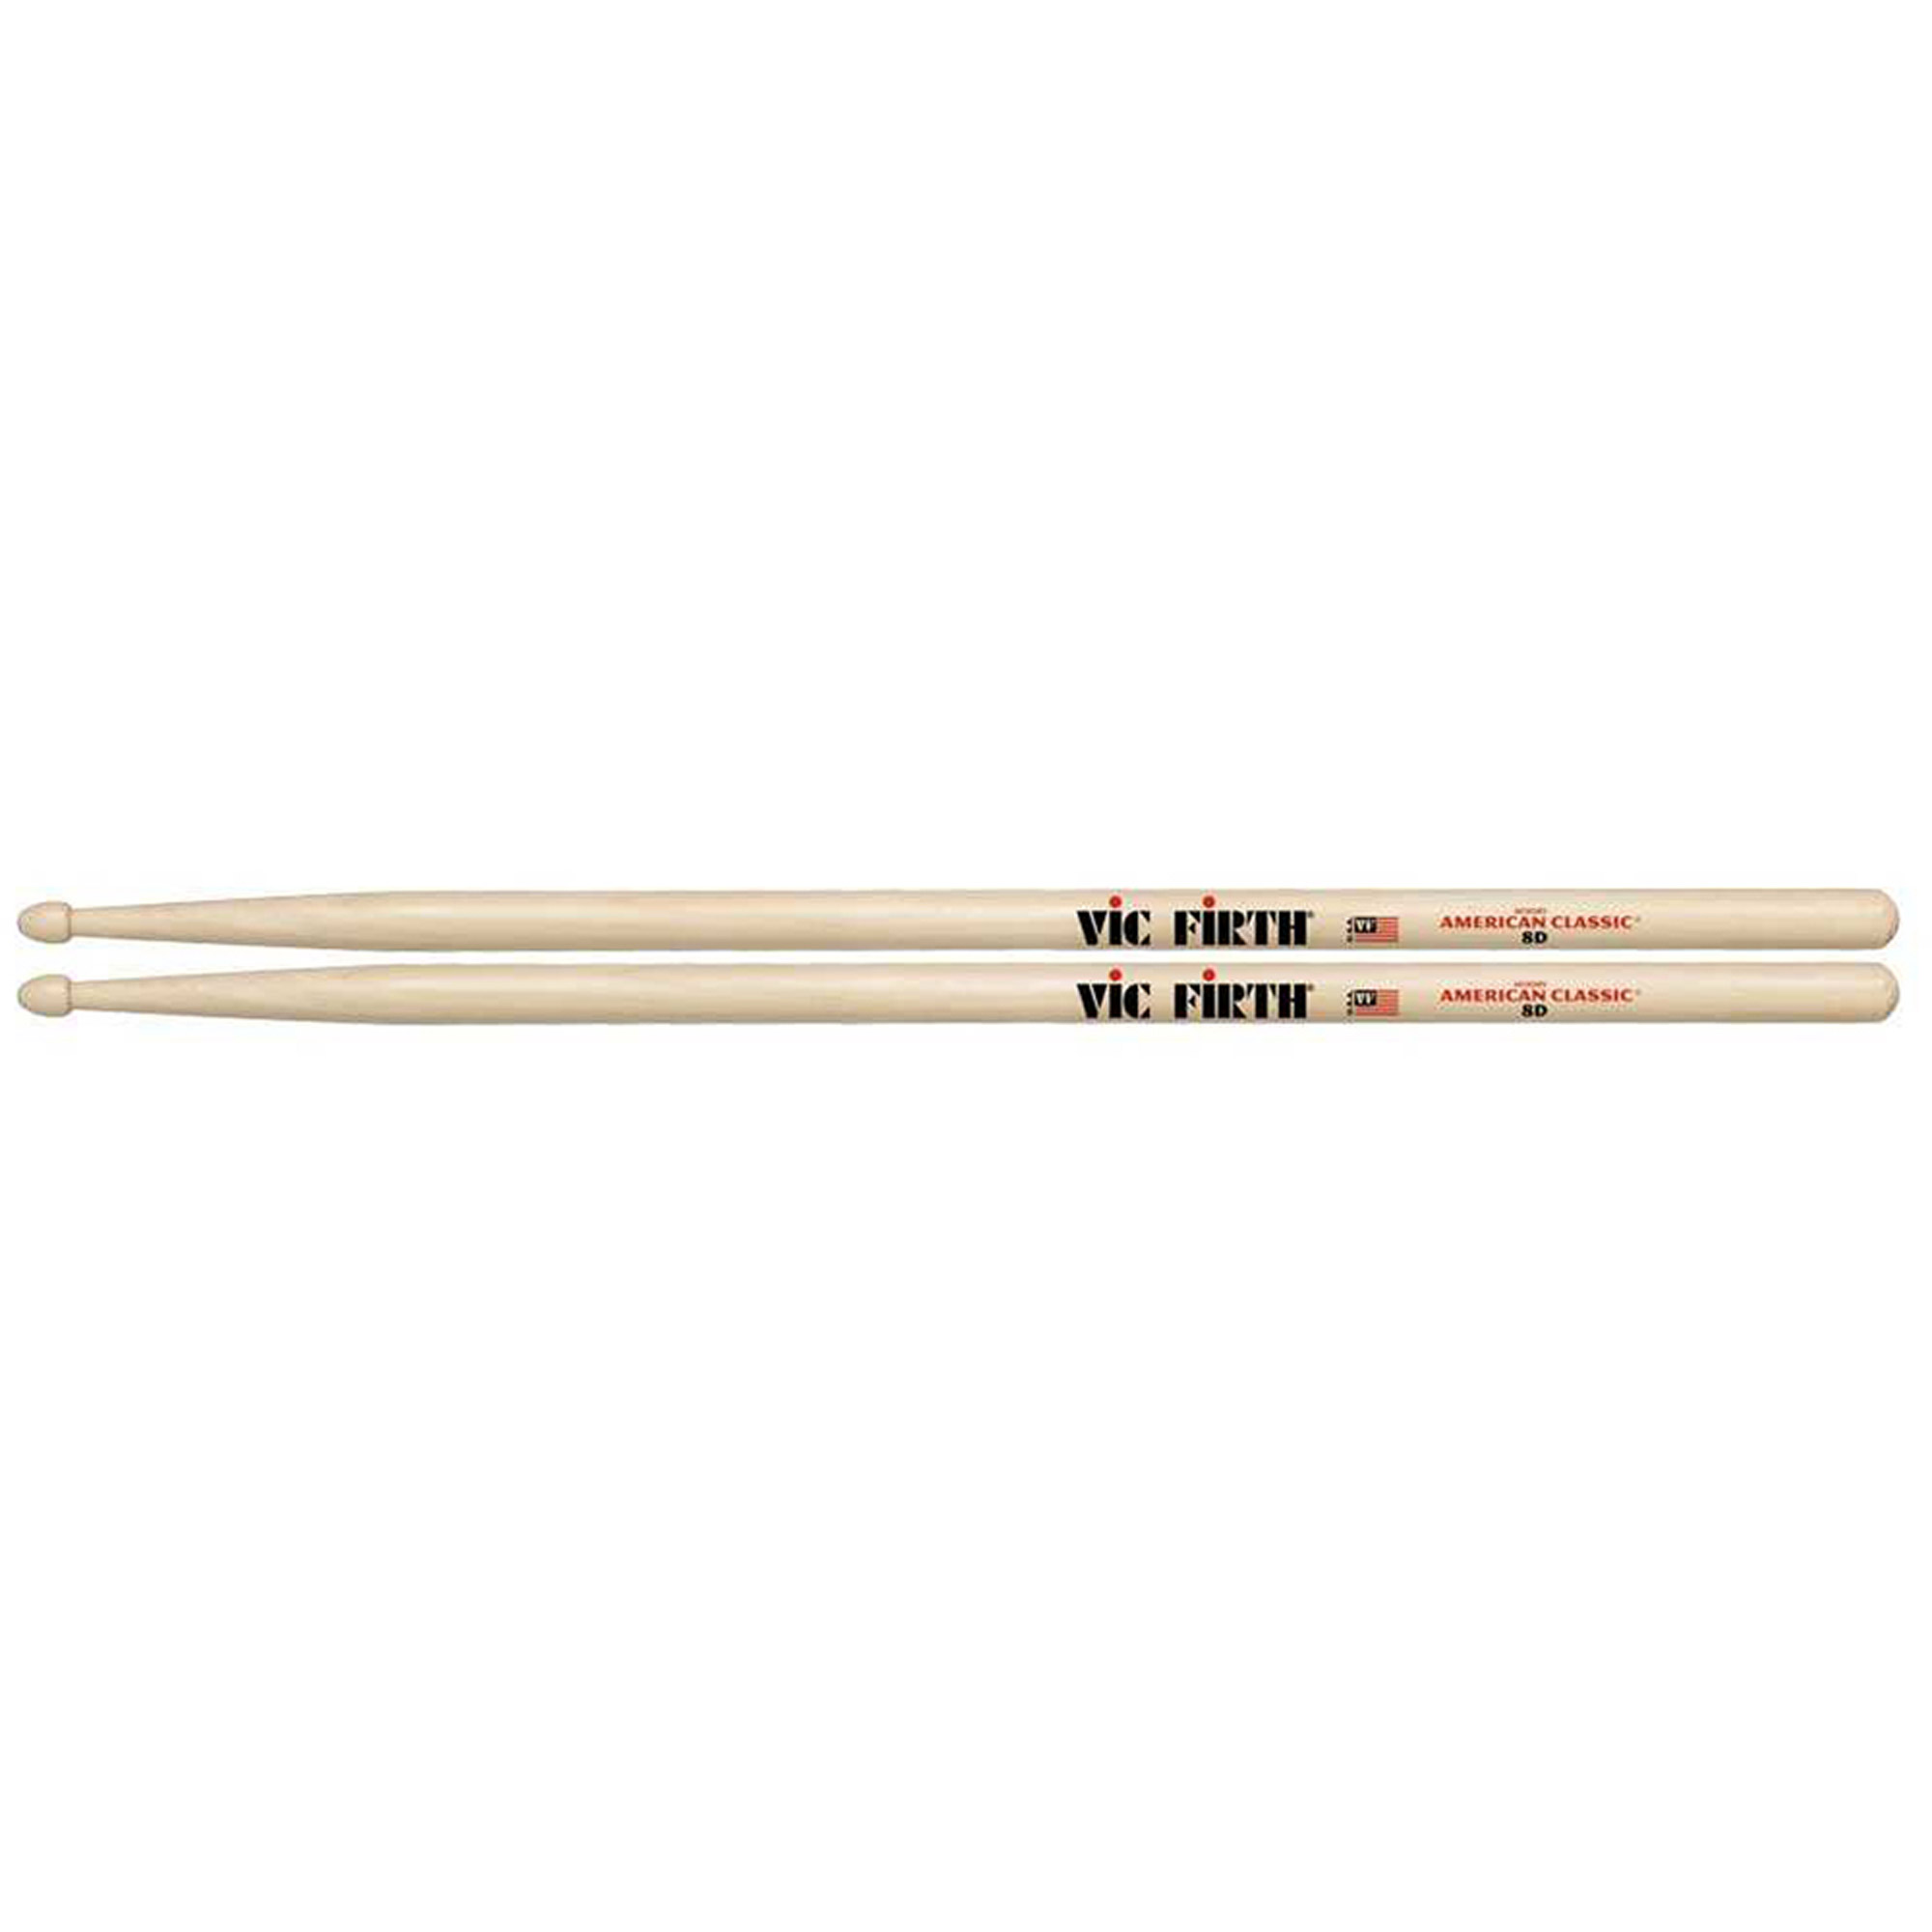 Vic Firth American Classic 8D Wood Tip Hickory Drumsticks - image 2 of 2